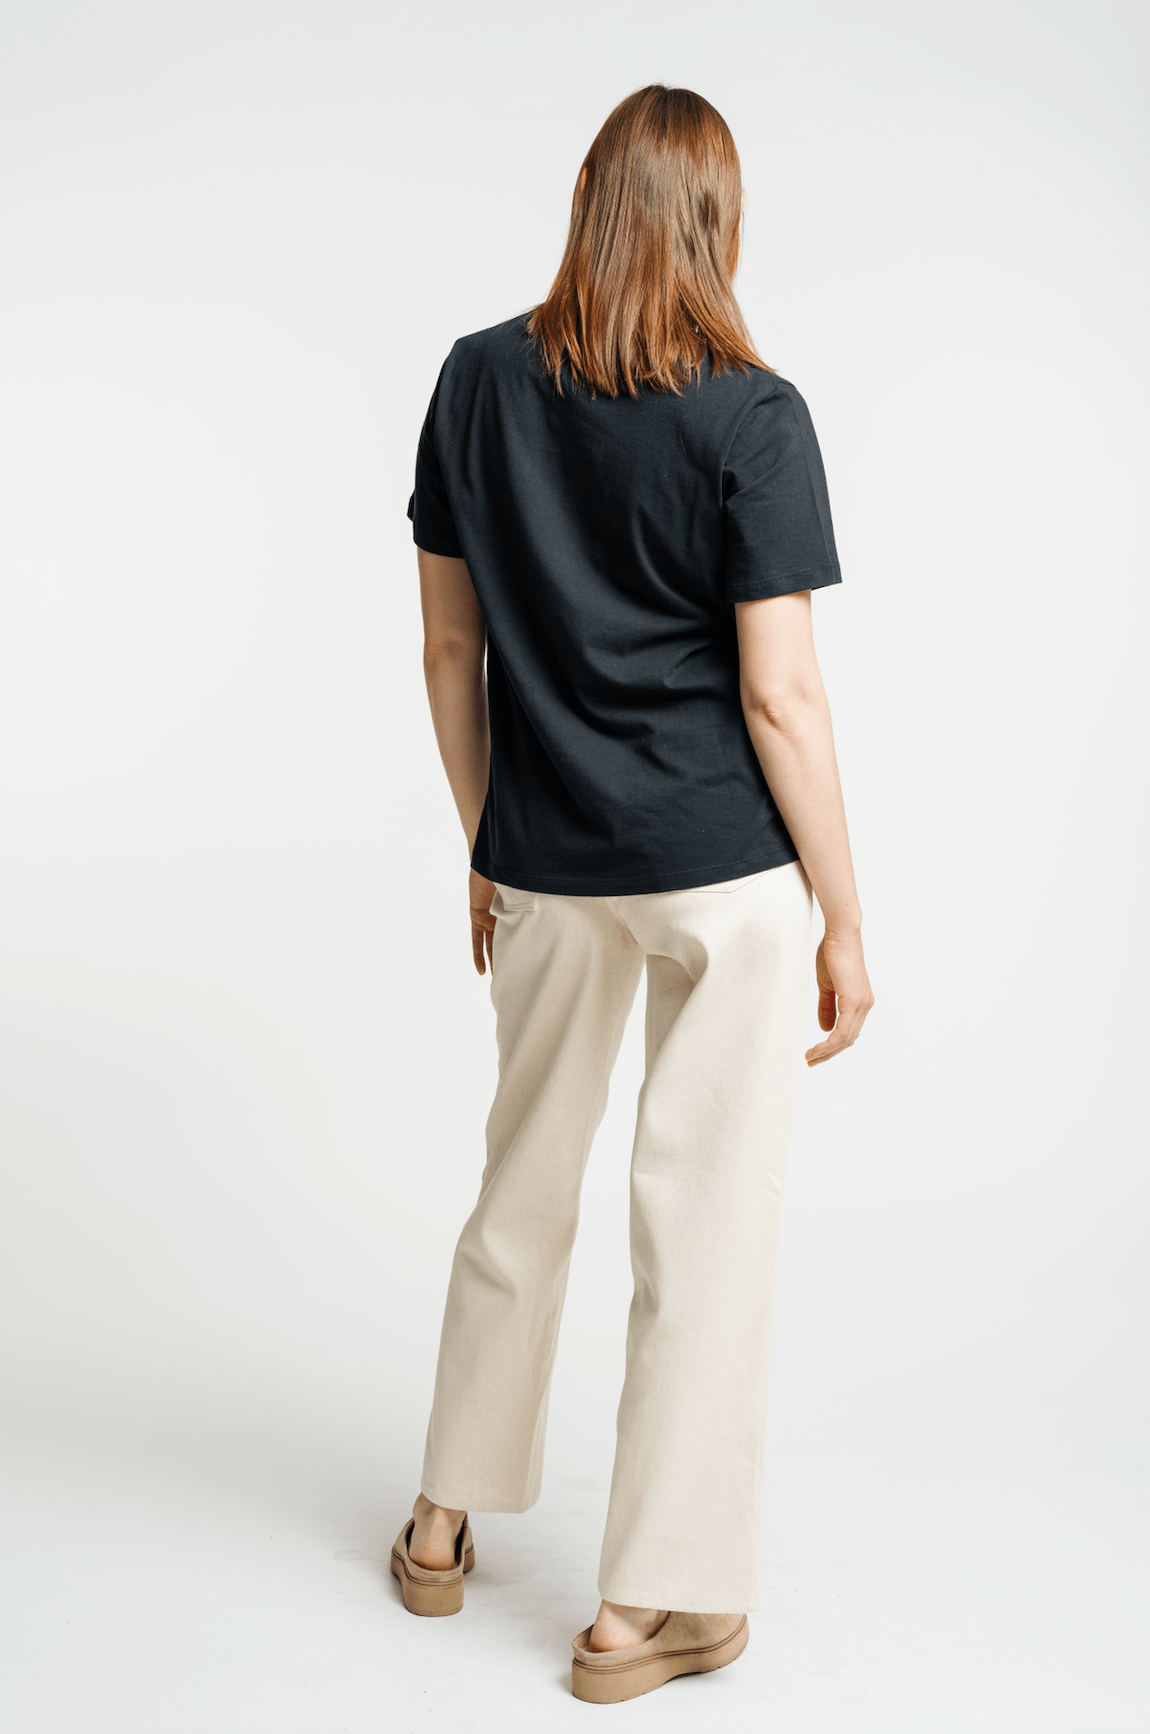 The woman is wearing an organic cotton black Crewneck T-Shirt and beige pants, seen from the back.